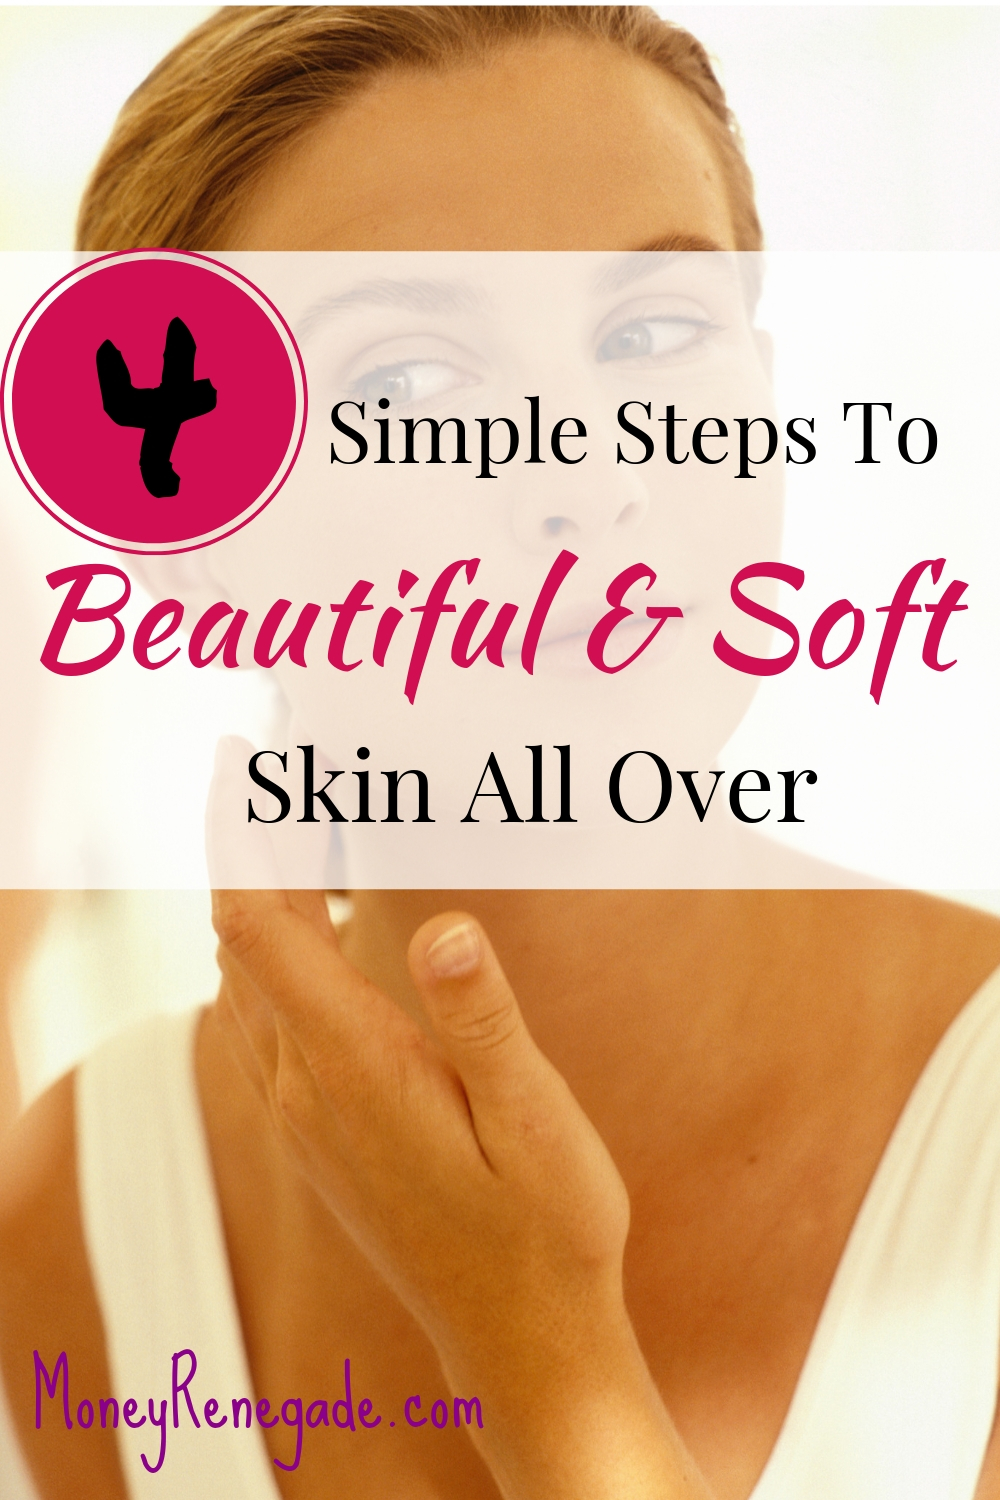 4 Techneiques to Beautiful skin